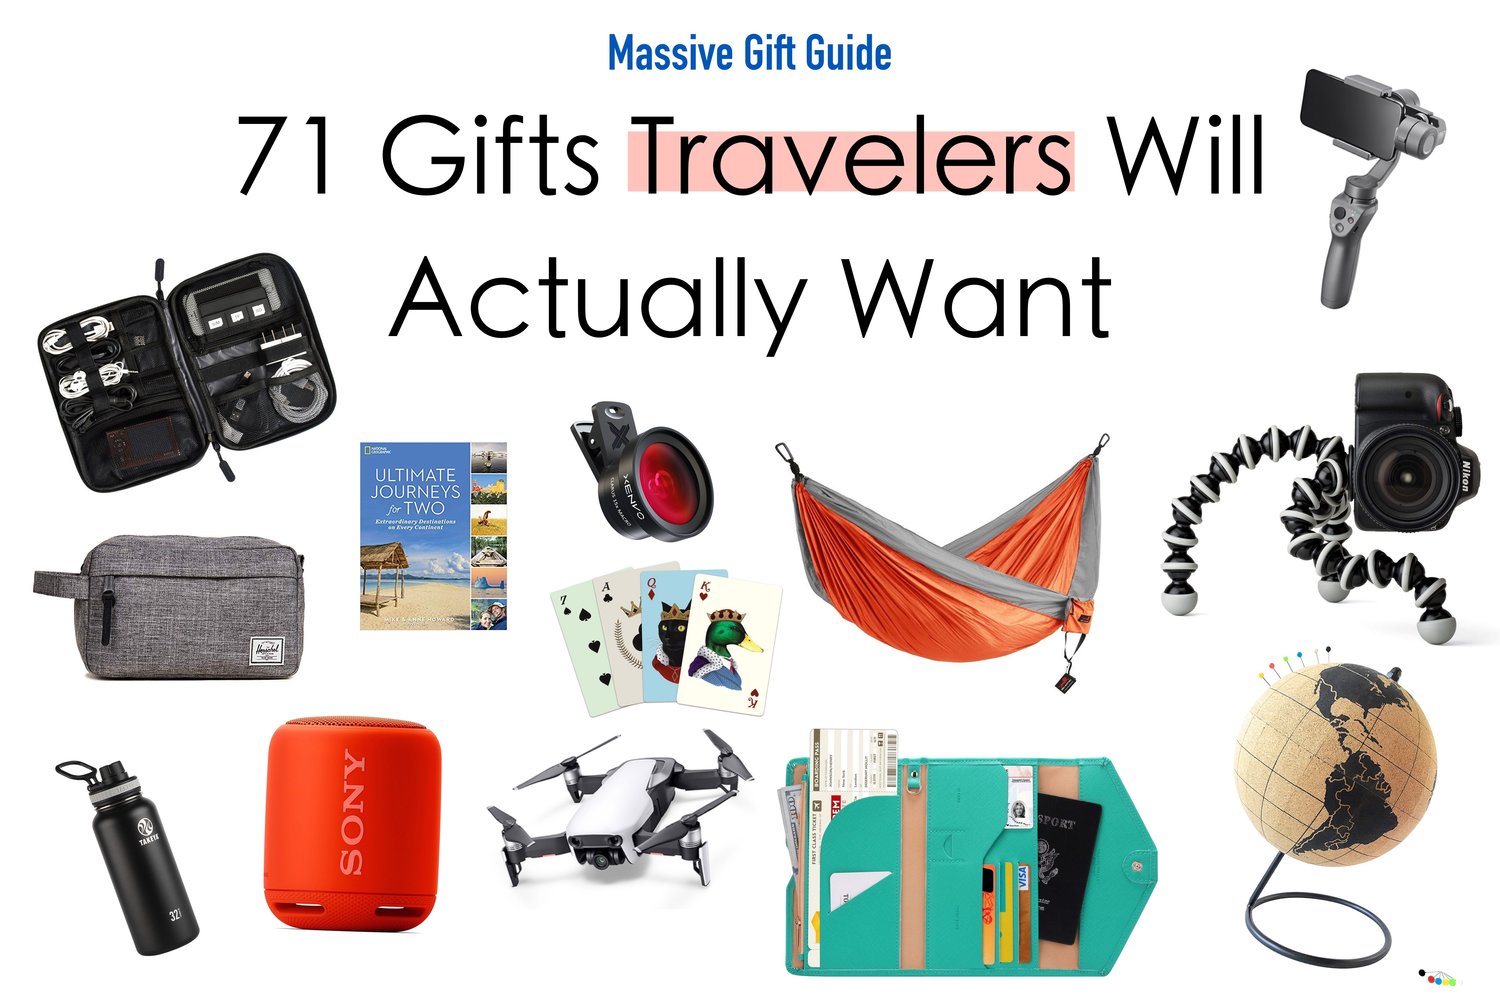 Top Travel Gifts for Your Adventurous Friends and Family